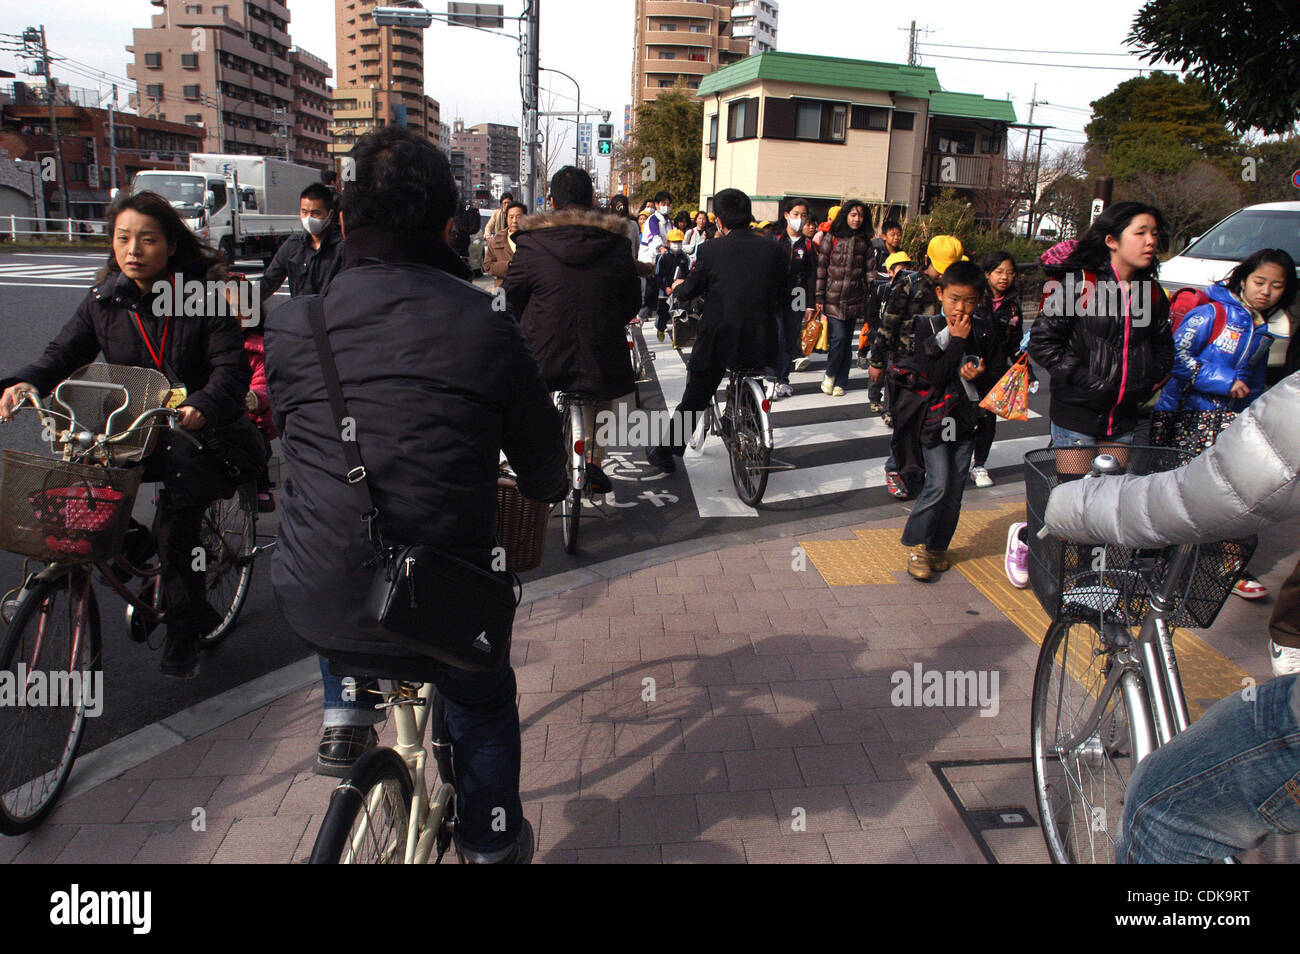 Mar 14, 2011 - Edogawa-Ku, Tokyo, Japan - People ride their bicycles on a busy street in Tokyo as elementary students pass by, days after Japan's 9.0 earthquake and tsunami. A massive, powerful and deadly 9.0 magnitude earthquake, the world's fifth largest quake ever recorded, struck at 2:46 p.m. lo Stock Photo